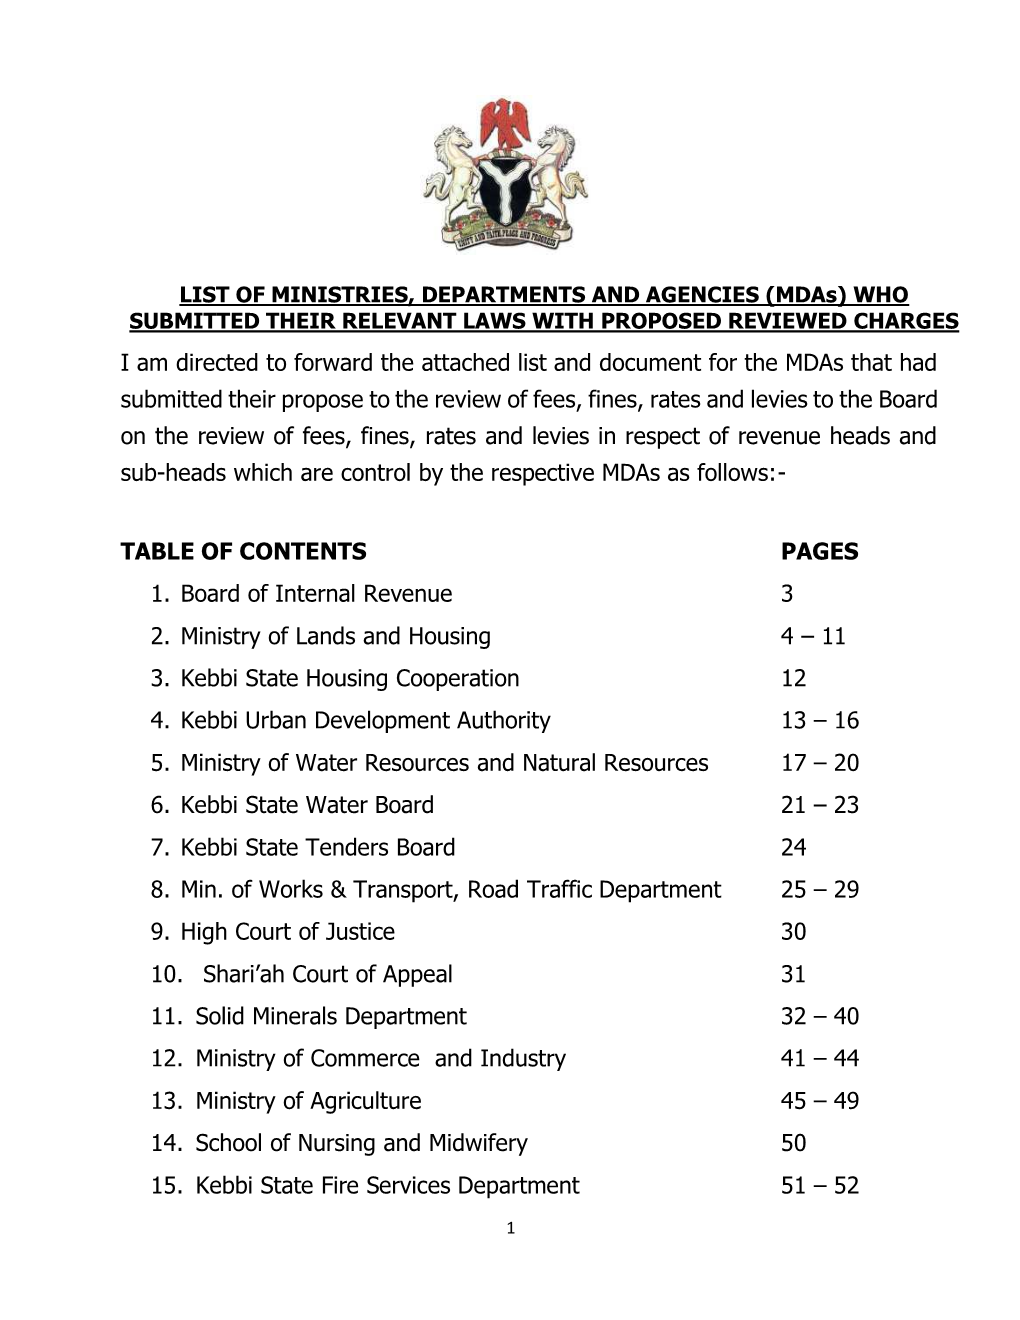 I Am Directed to Forward the Attached List and Document for the Mdas That Had Submitted Their Propose to the Review of Fees